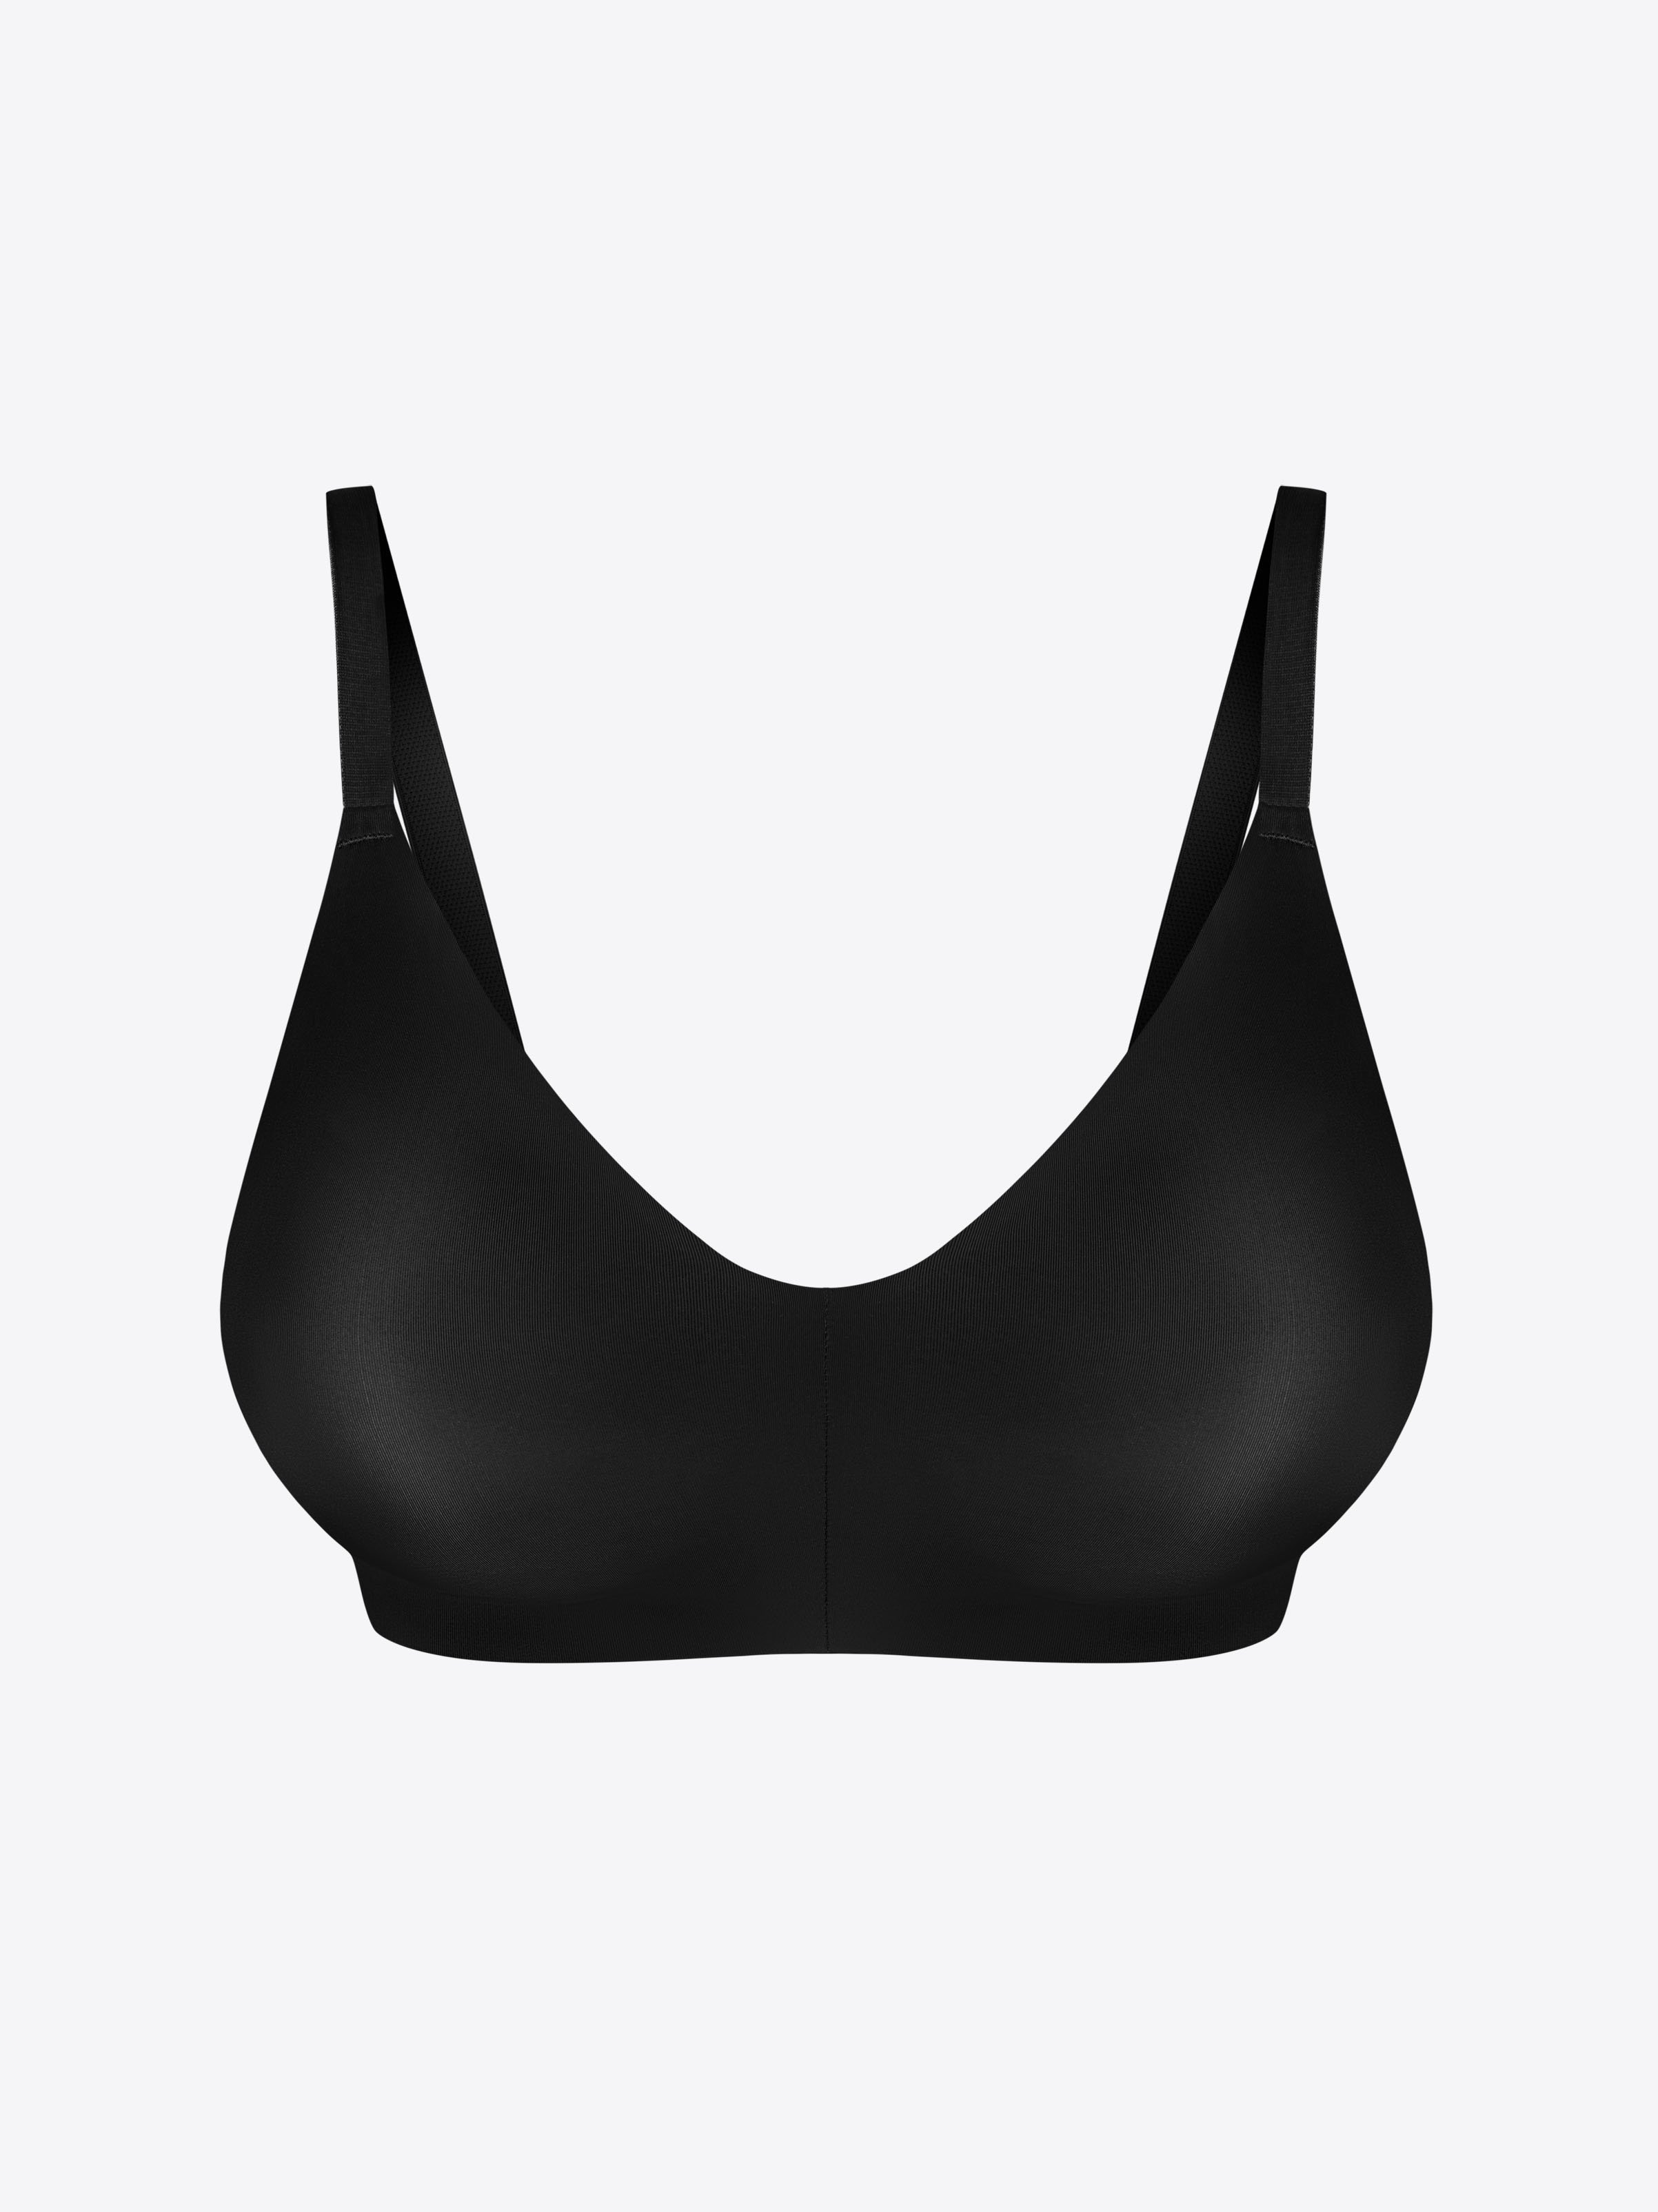 A real sport mode bra has entered the chat! As a 38G I need a